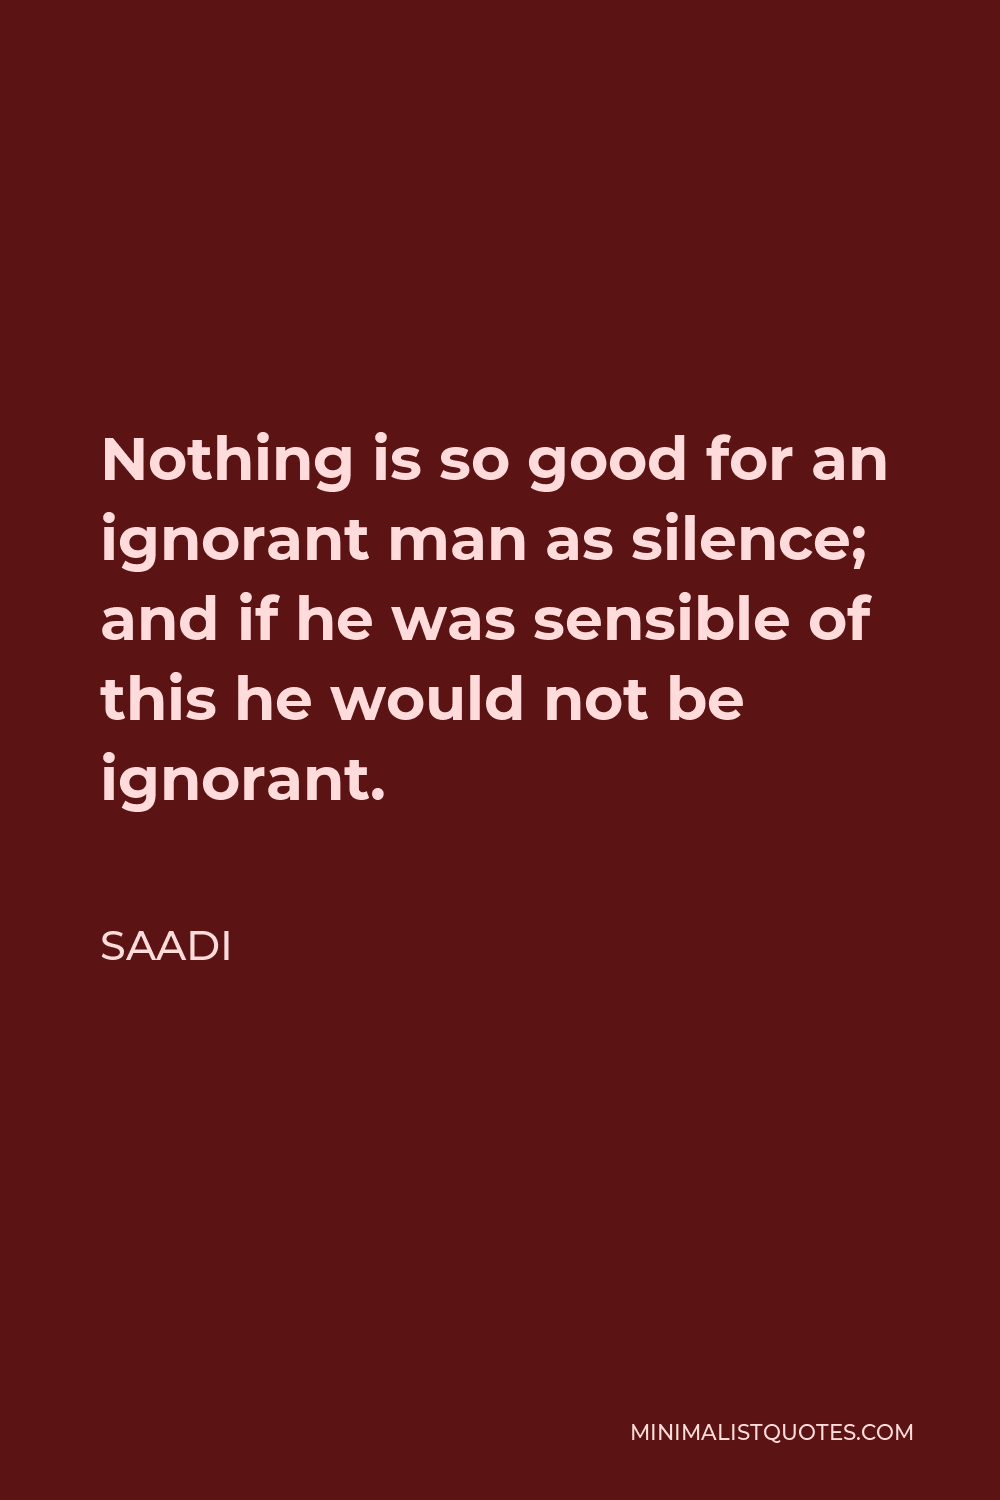 Saadi Quote - Nothing is so good for an ignorant man as silence; and if he was sensible of this he would not be ignorant.